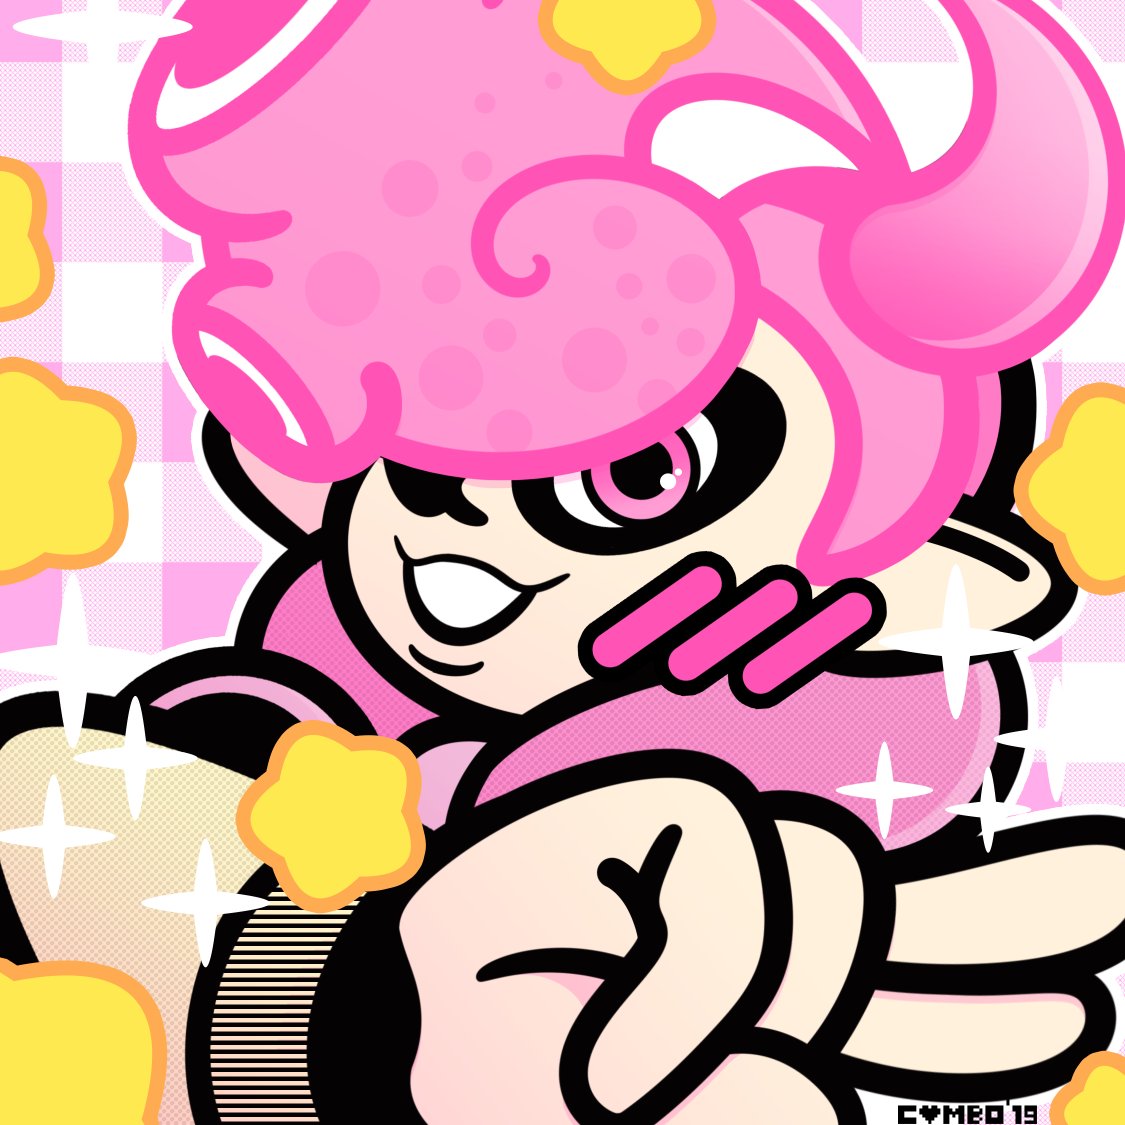 Bit of personal hype, but I frequently play as this octoling in S2, and when I draw them or friends draw them, I request for a "Clefairy flip" for the hairstyle cause it's not in S2 but I think the curl is cute

S3 IS GIVING ME THAT HAIR CURL ???

3rd image is by @DroseAttack 